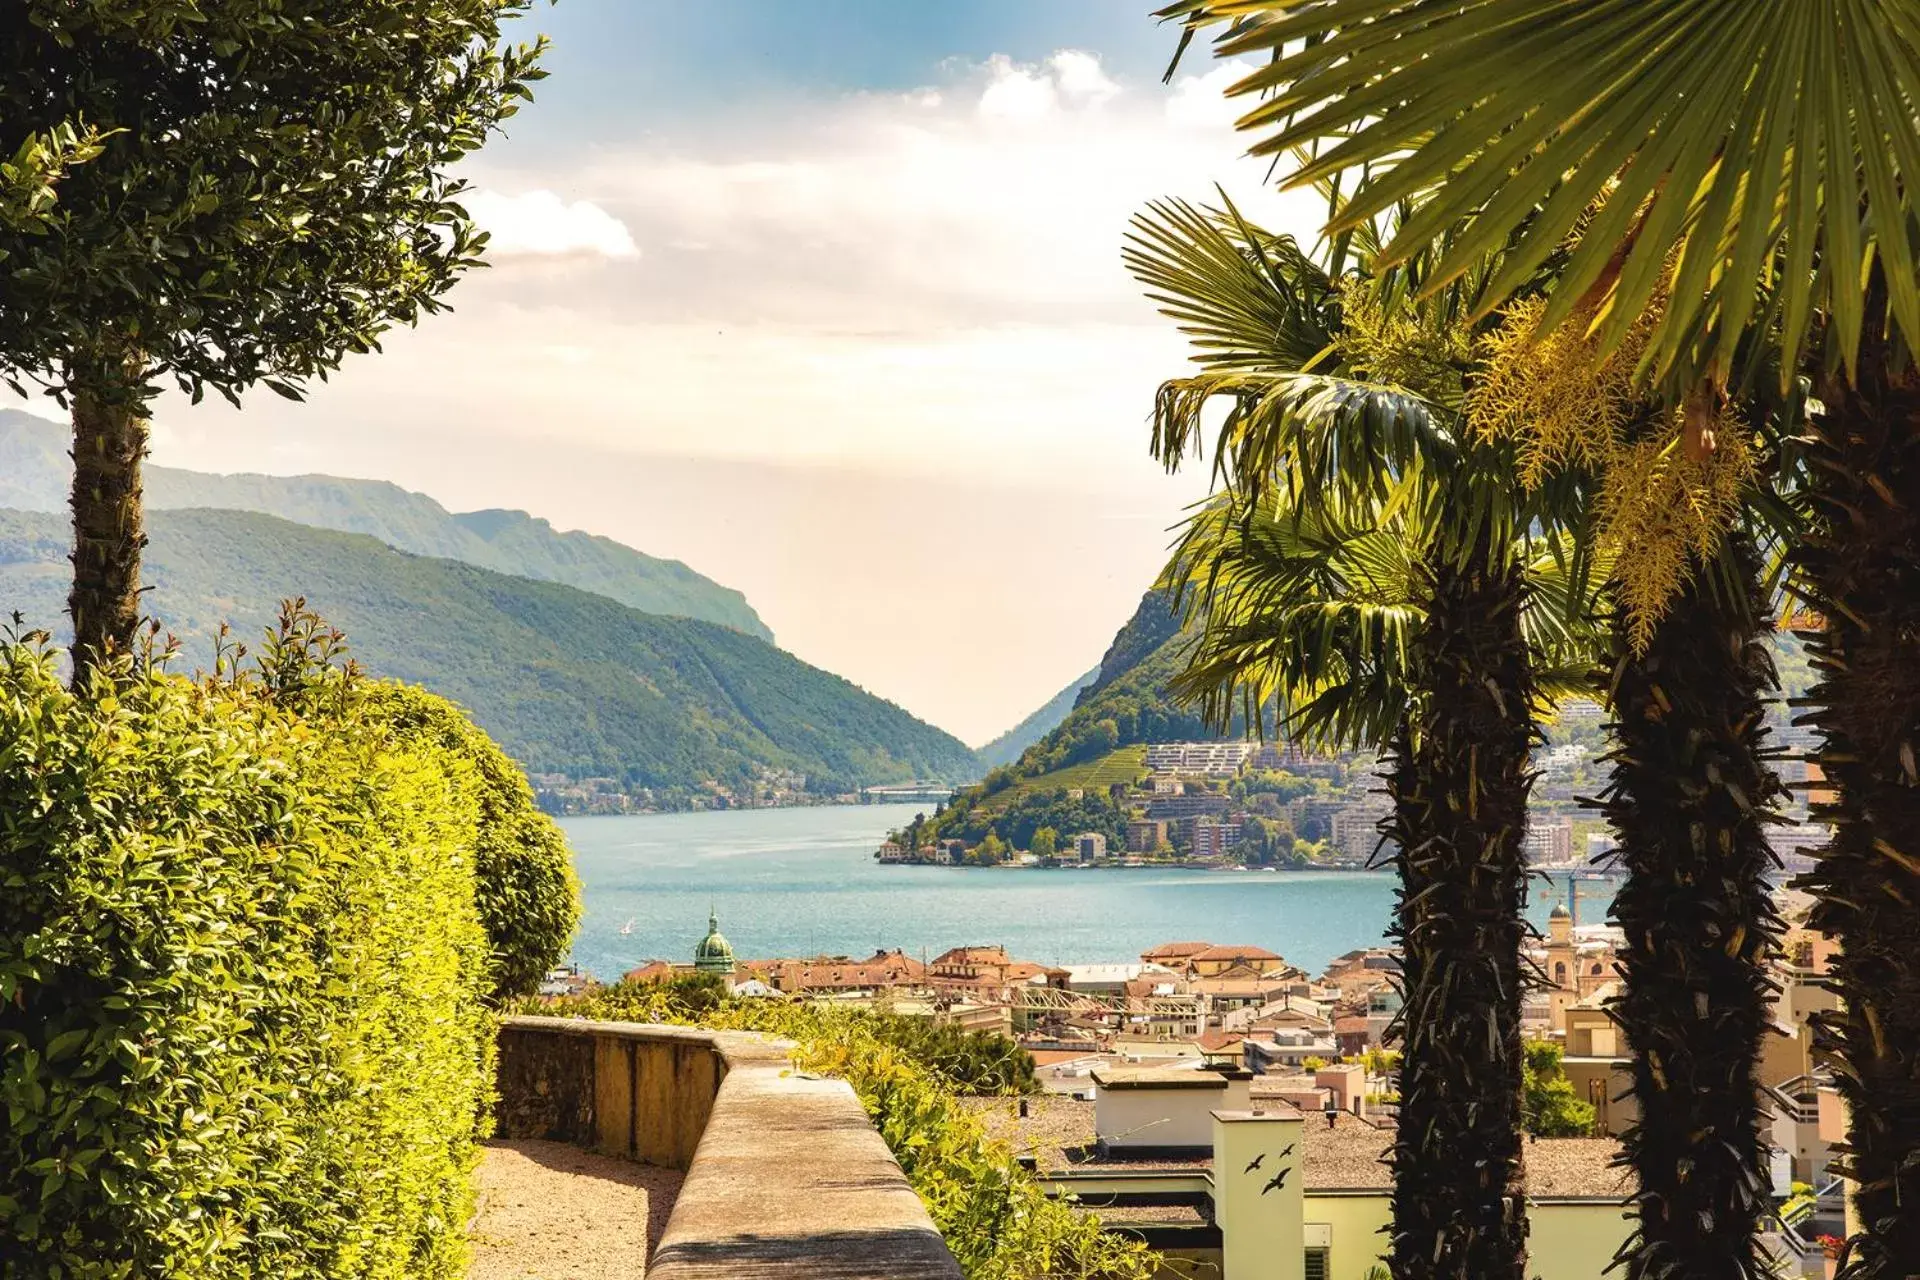 Lake view, Mountain View in Villa Sassa Hotel, Residence & Spa - Ticino Hotels Group